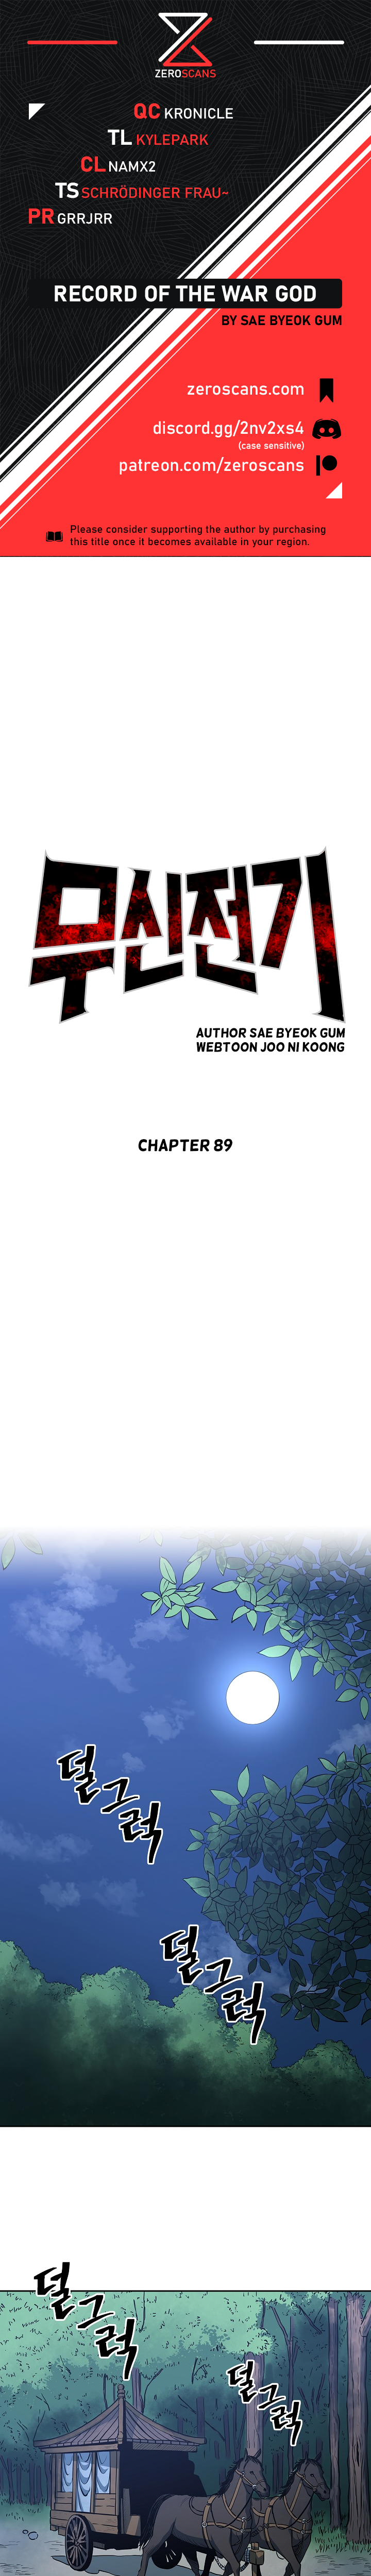 Record of the War God - Chapter 5965 - Image 1